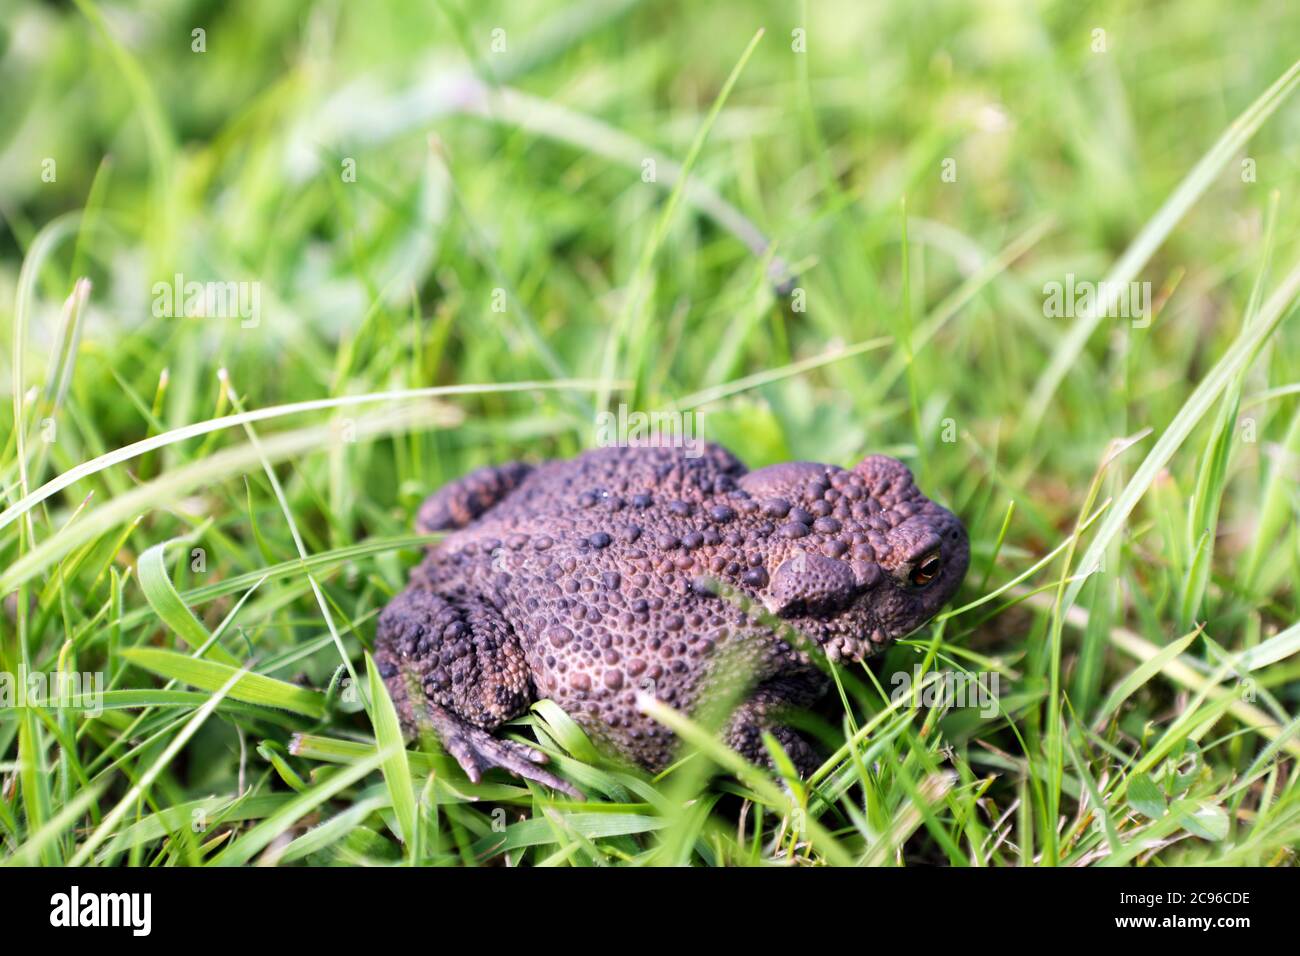 Common toad, Bufo bufo in long grass Stock Photo